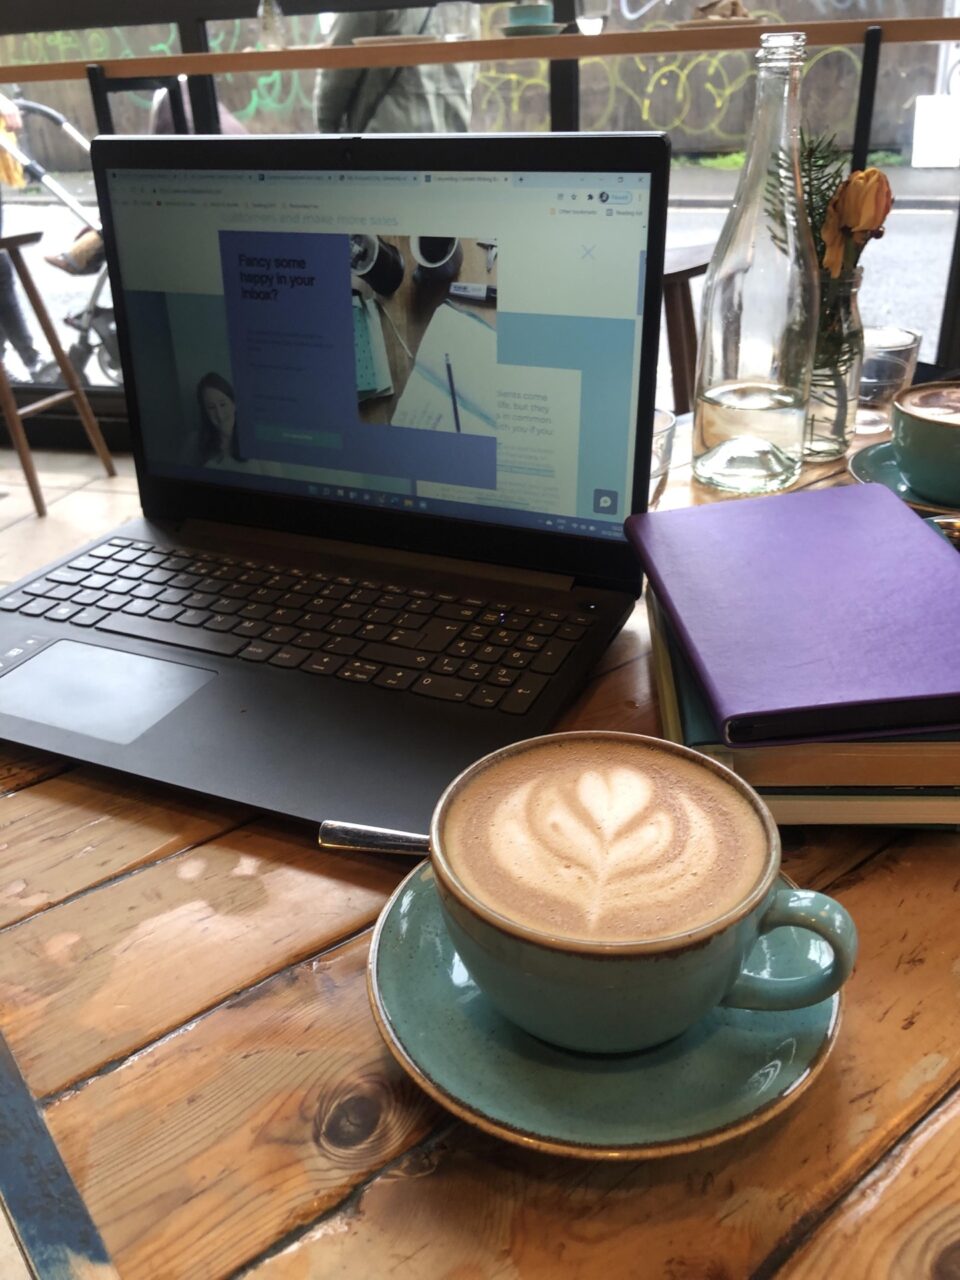 a table top with an open laptop, a stack of notebooks (one purple one green) and a turquoise teacup and saucer with an oatmilk latte in it. Theres swirly latte art on the coffee.